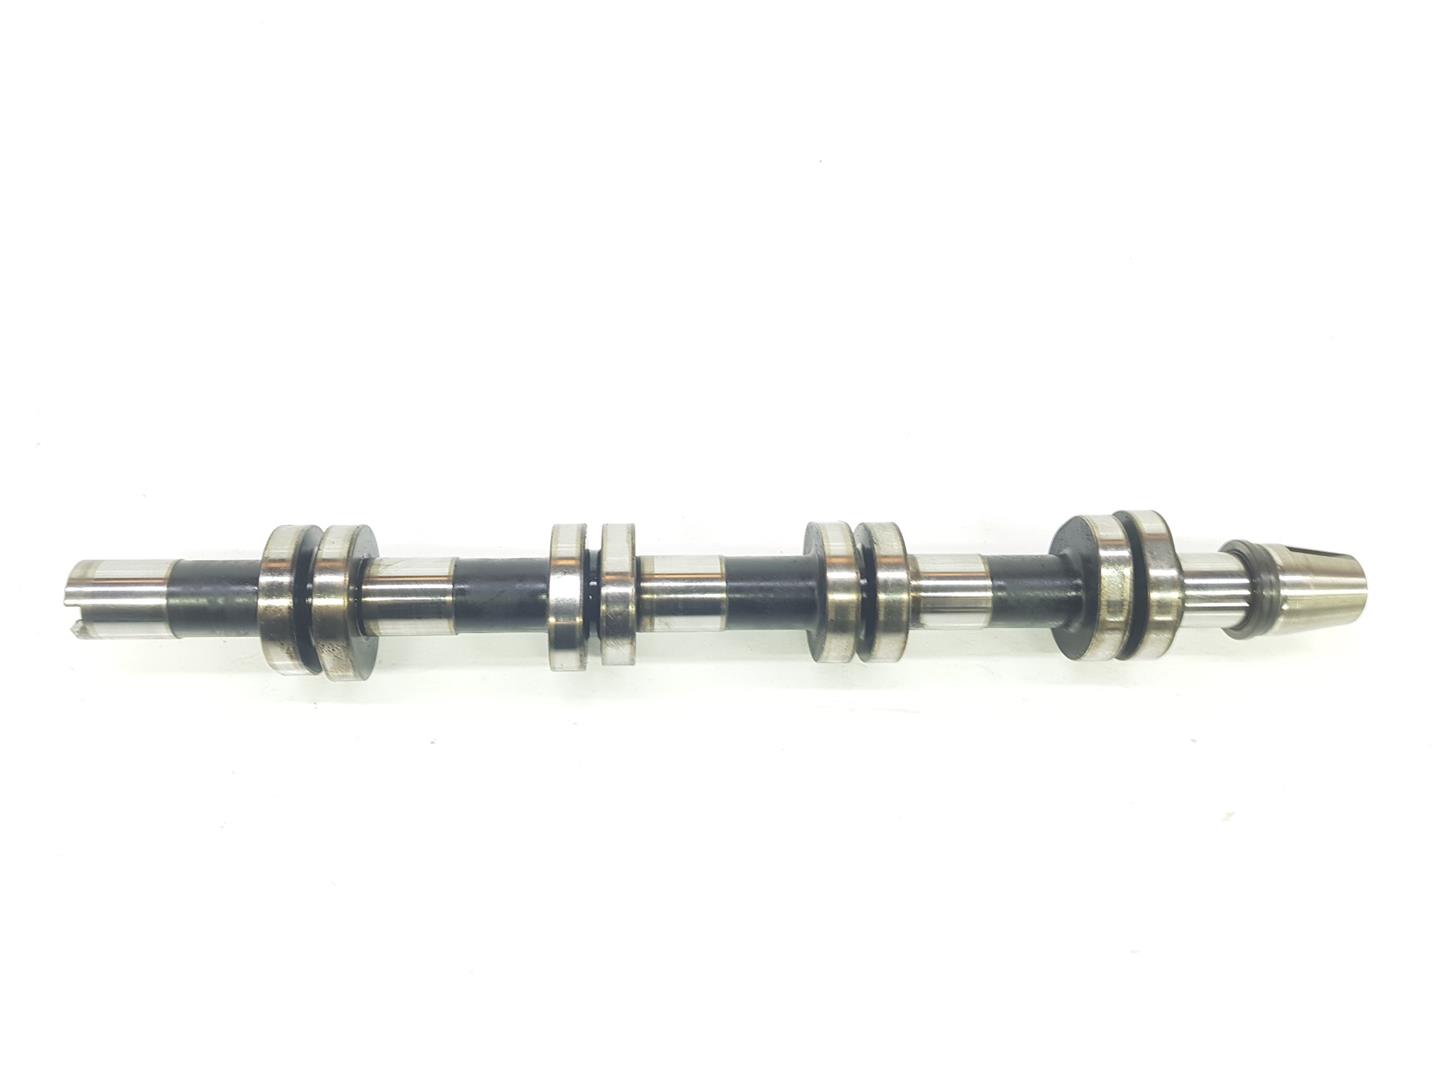 AUDI A3 8P (2003-2013) Exhaust Camshaft 03G109101A, 03G109101A, ADMISION2222DL 19819958